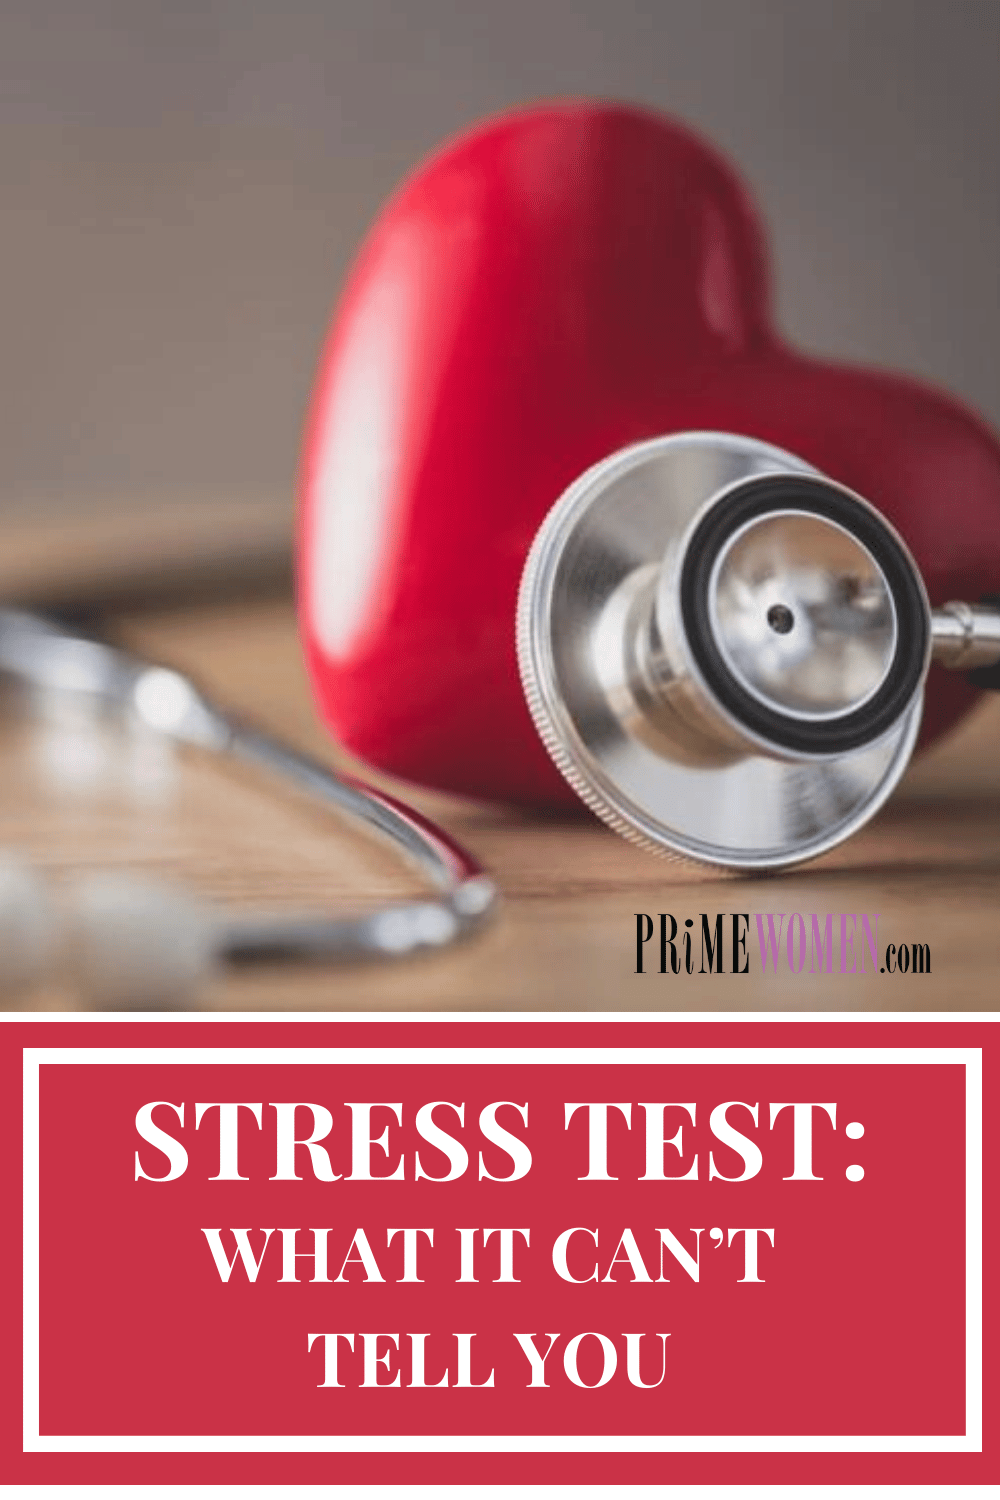 Stress Tests are useless